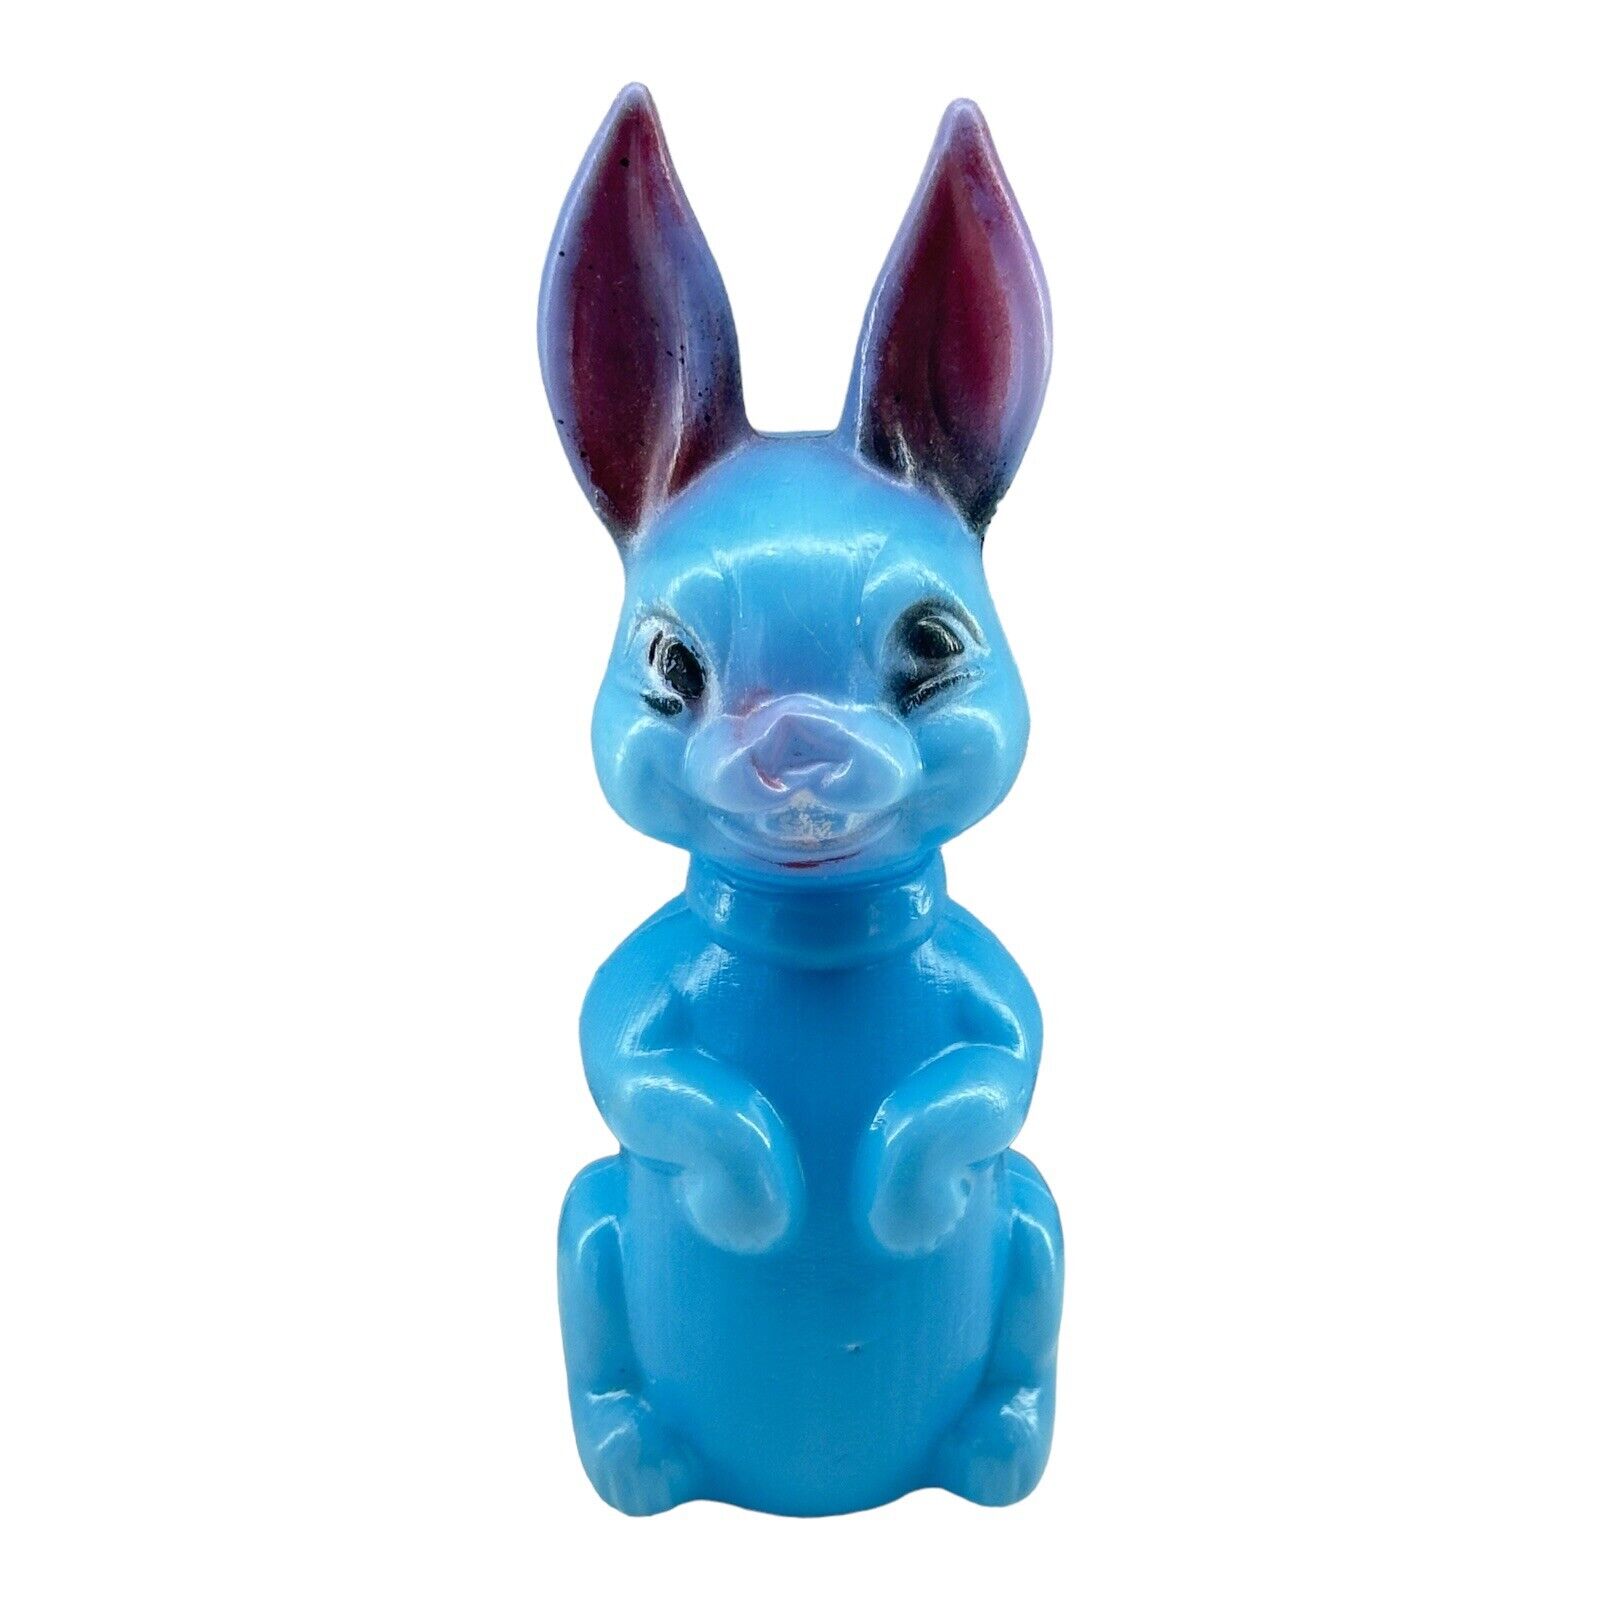 Blue Easter Bunny Blow Mold Bubbles or Candy Container 6.75” Hong Kong 1970s VTG